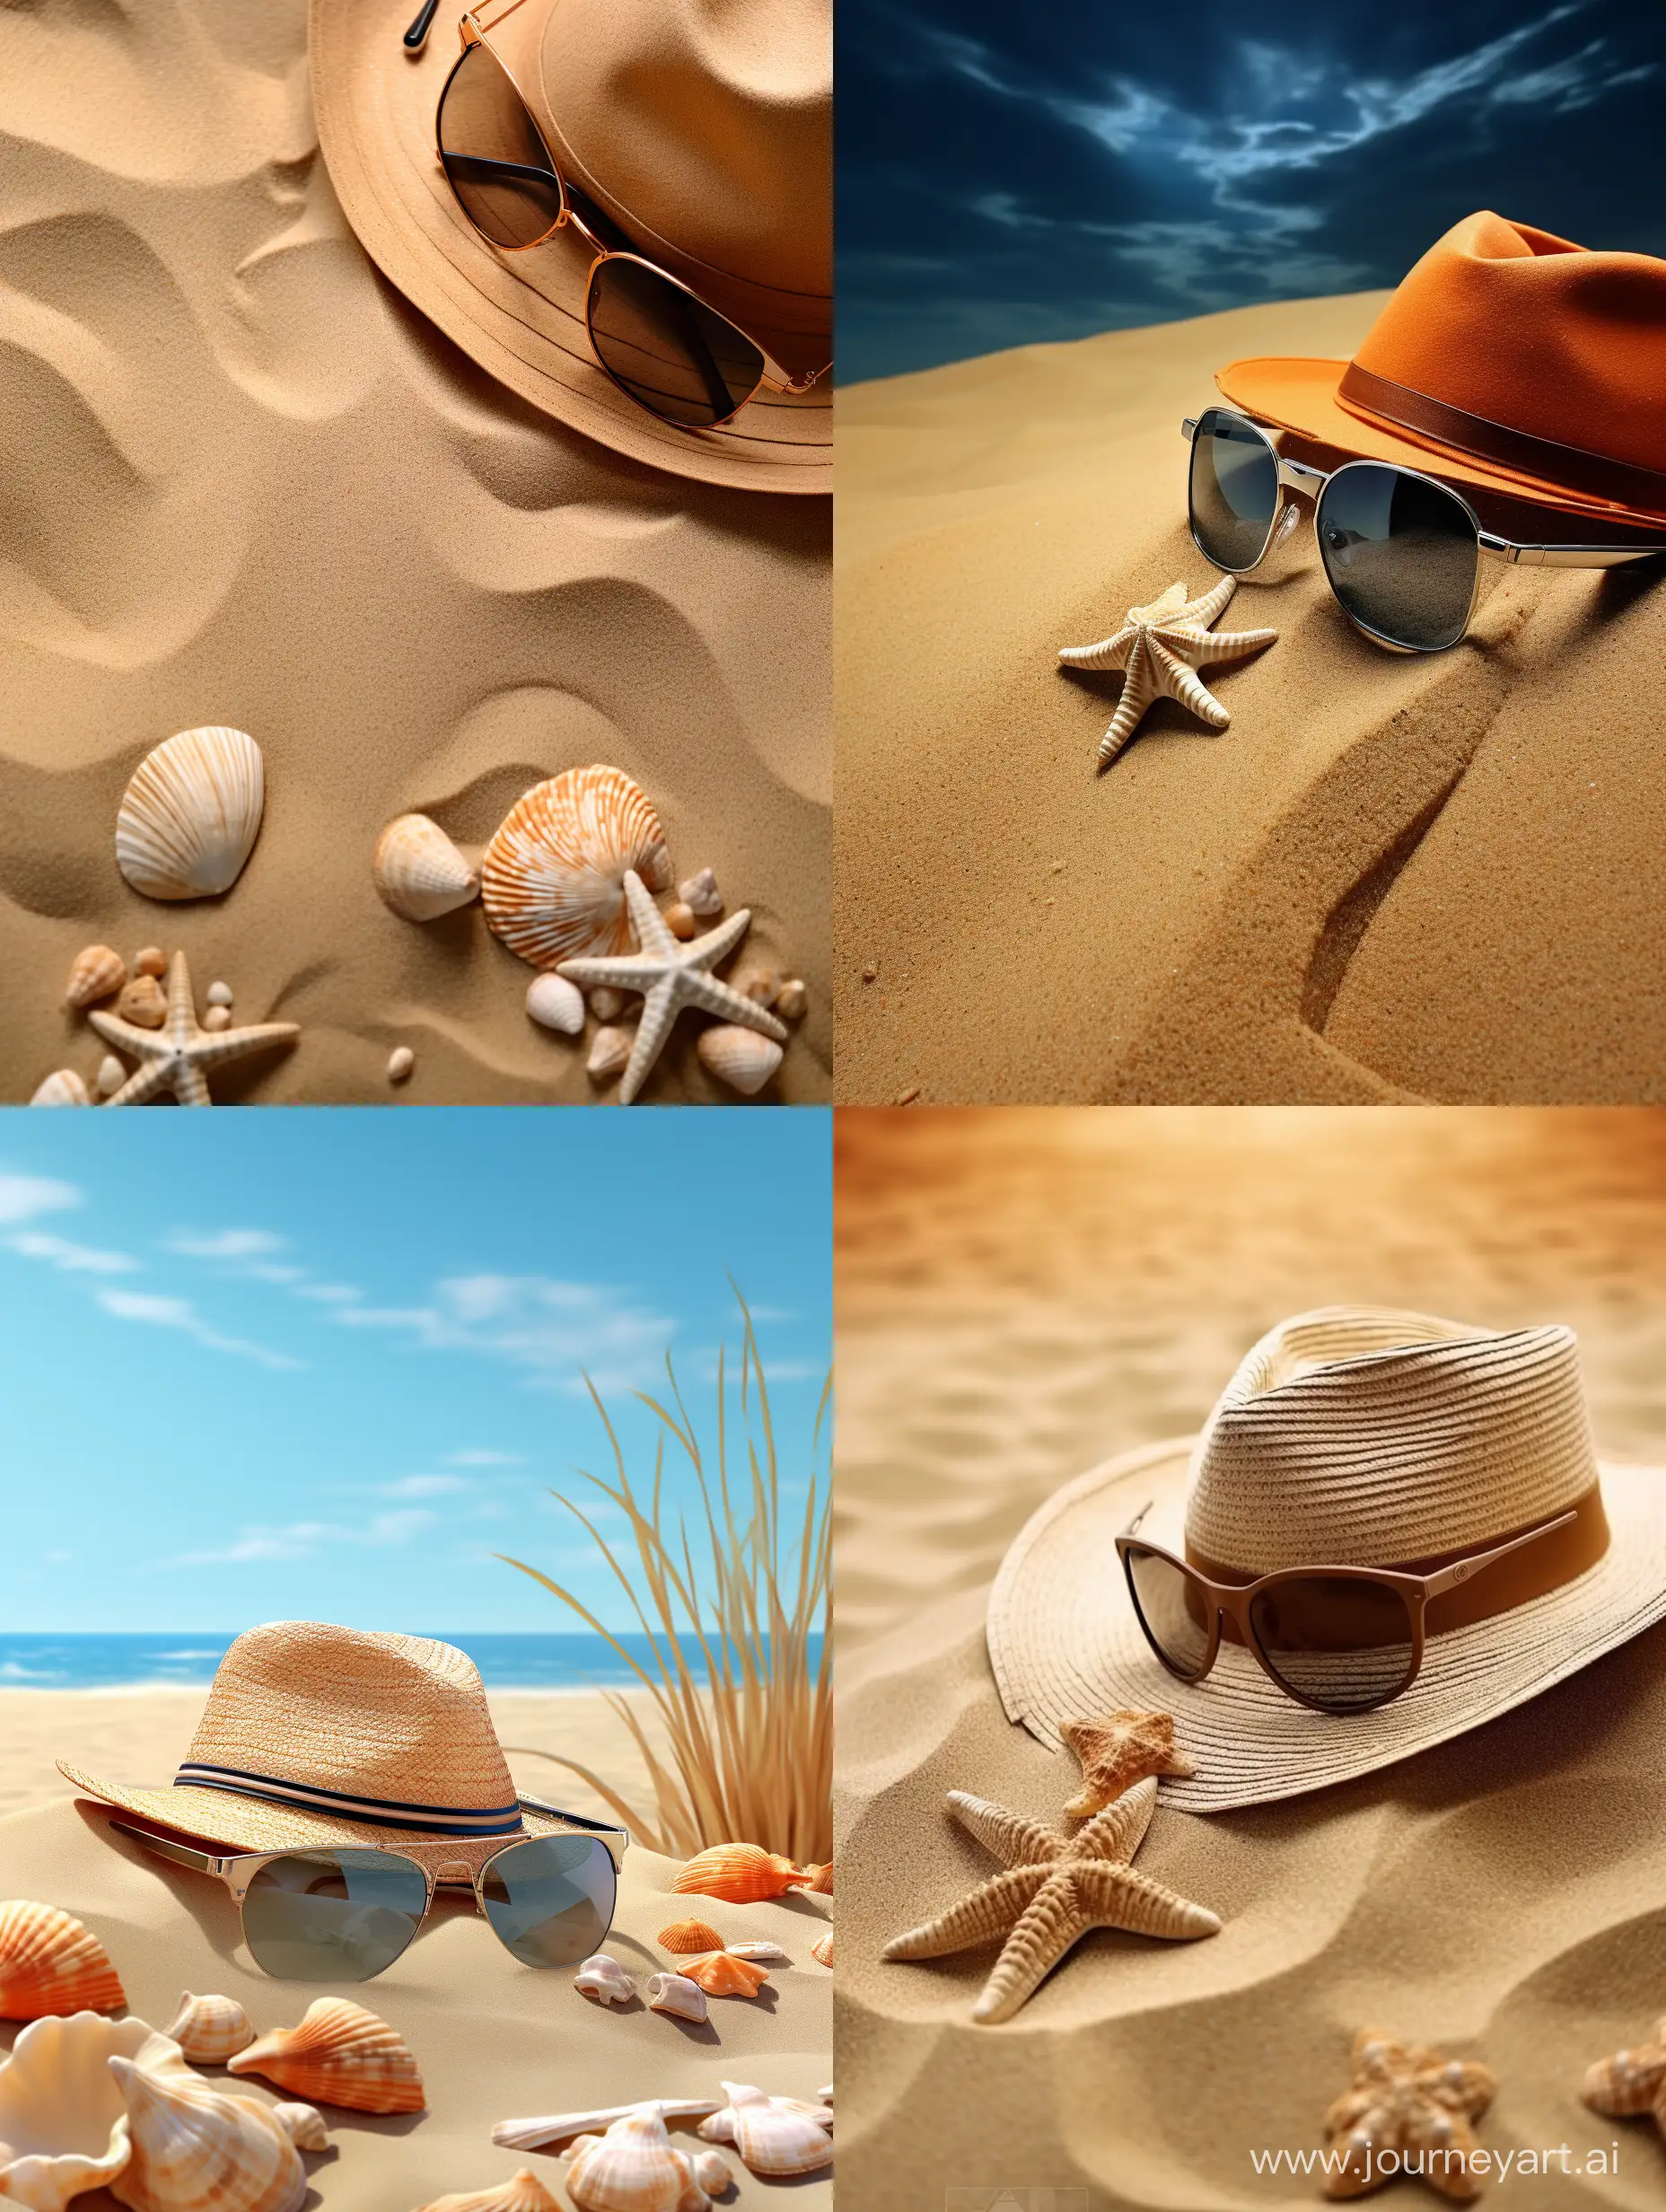 Seaside-Serenity-Tranquil-Beachscape-with-Sand-Shells-and-Stylish-Accessories